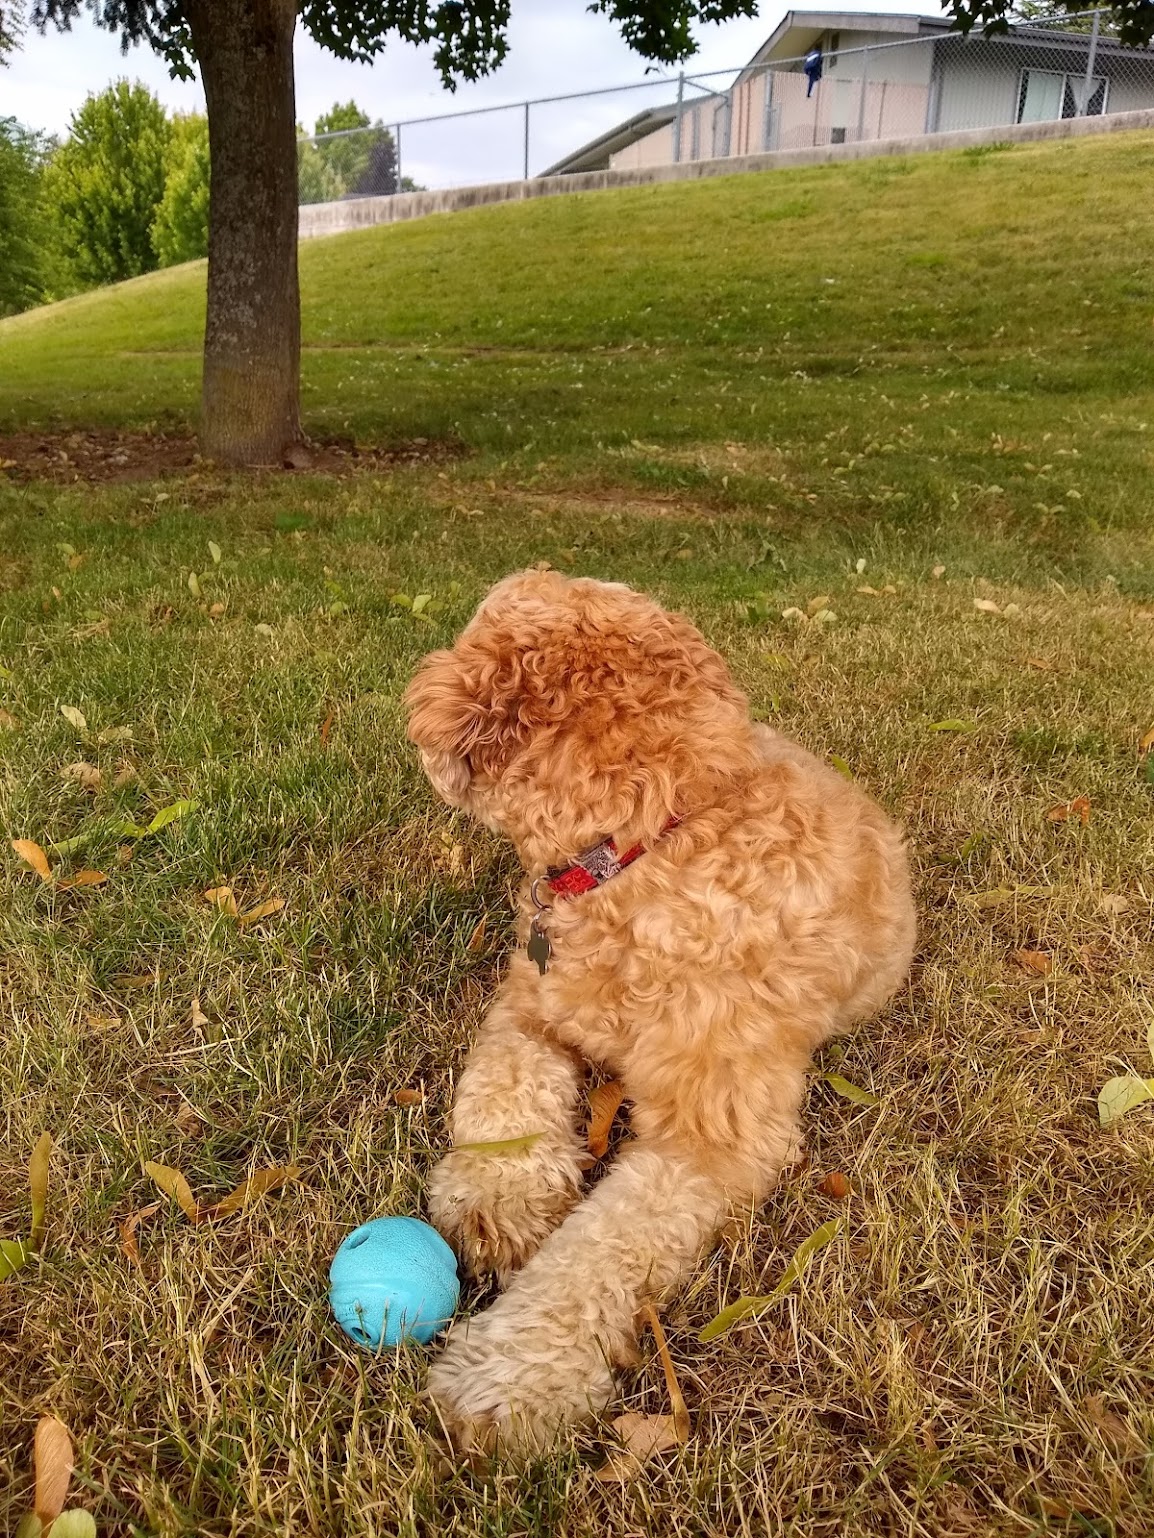 Hachi looking away from a blue ball at the park.